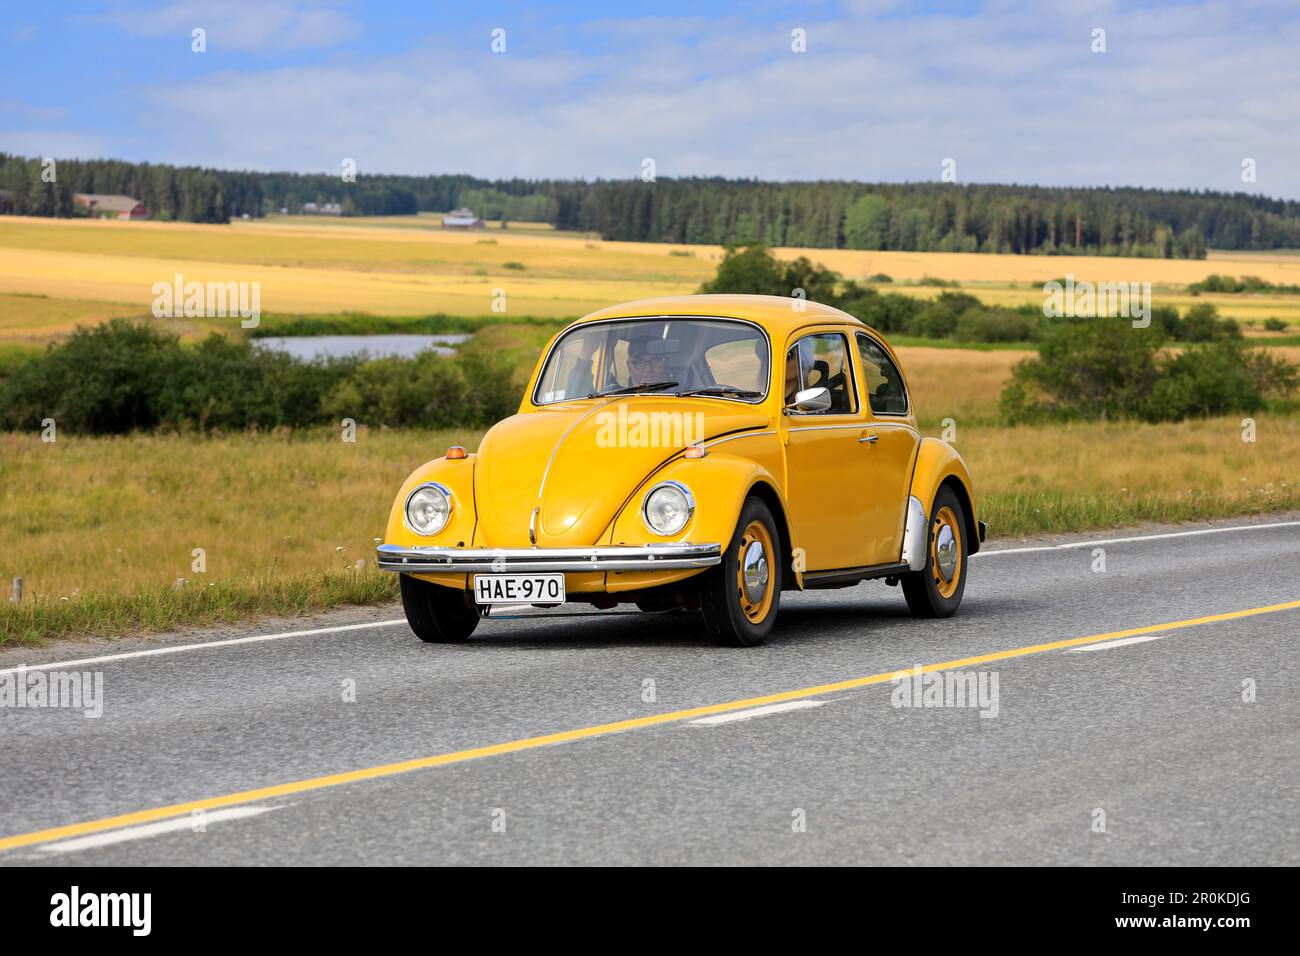 Yellow Volkswagen Beetle, officially Volkswagen Type 1, driving along country road on Maisemaruise 2019 car cruise. Vaulammi, Finland. August 3, 2019. Stock Photo